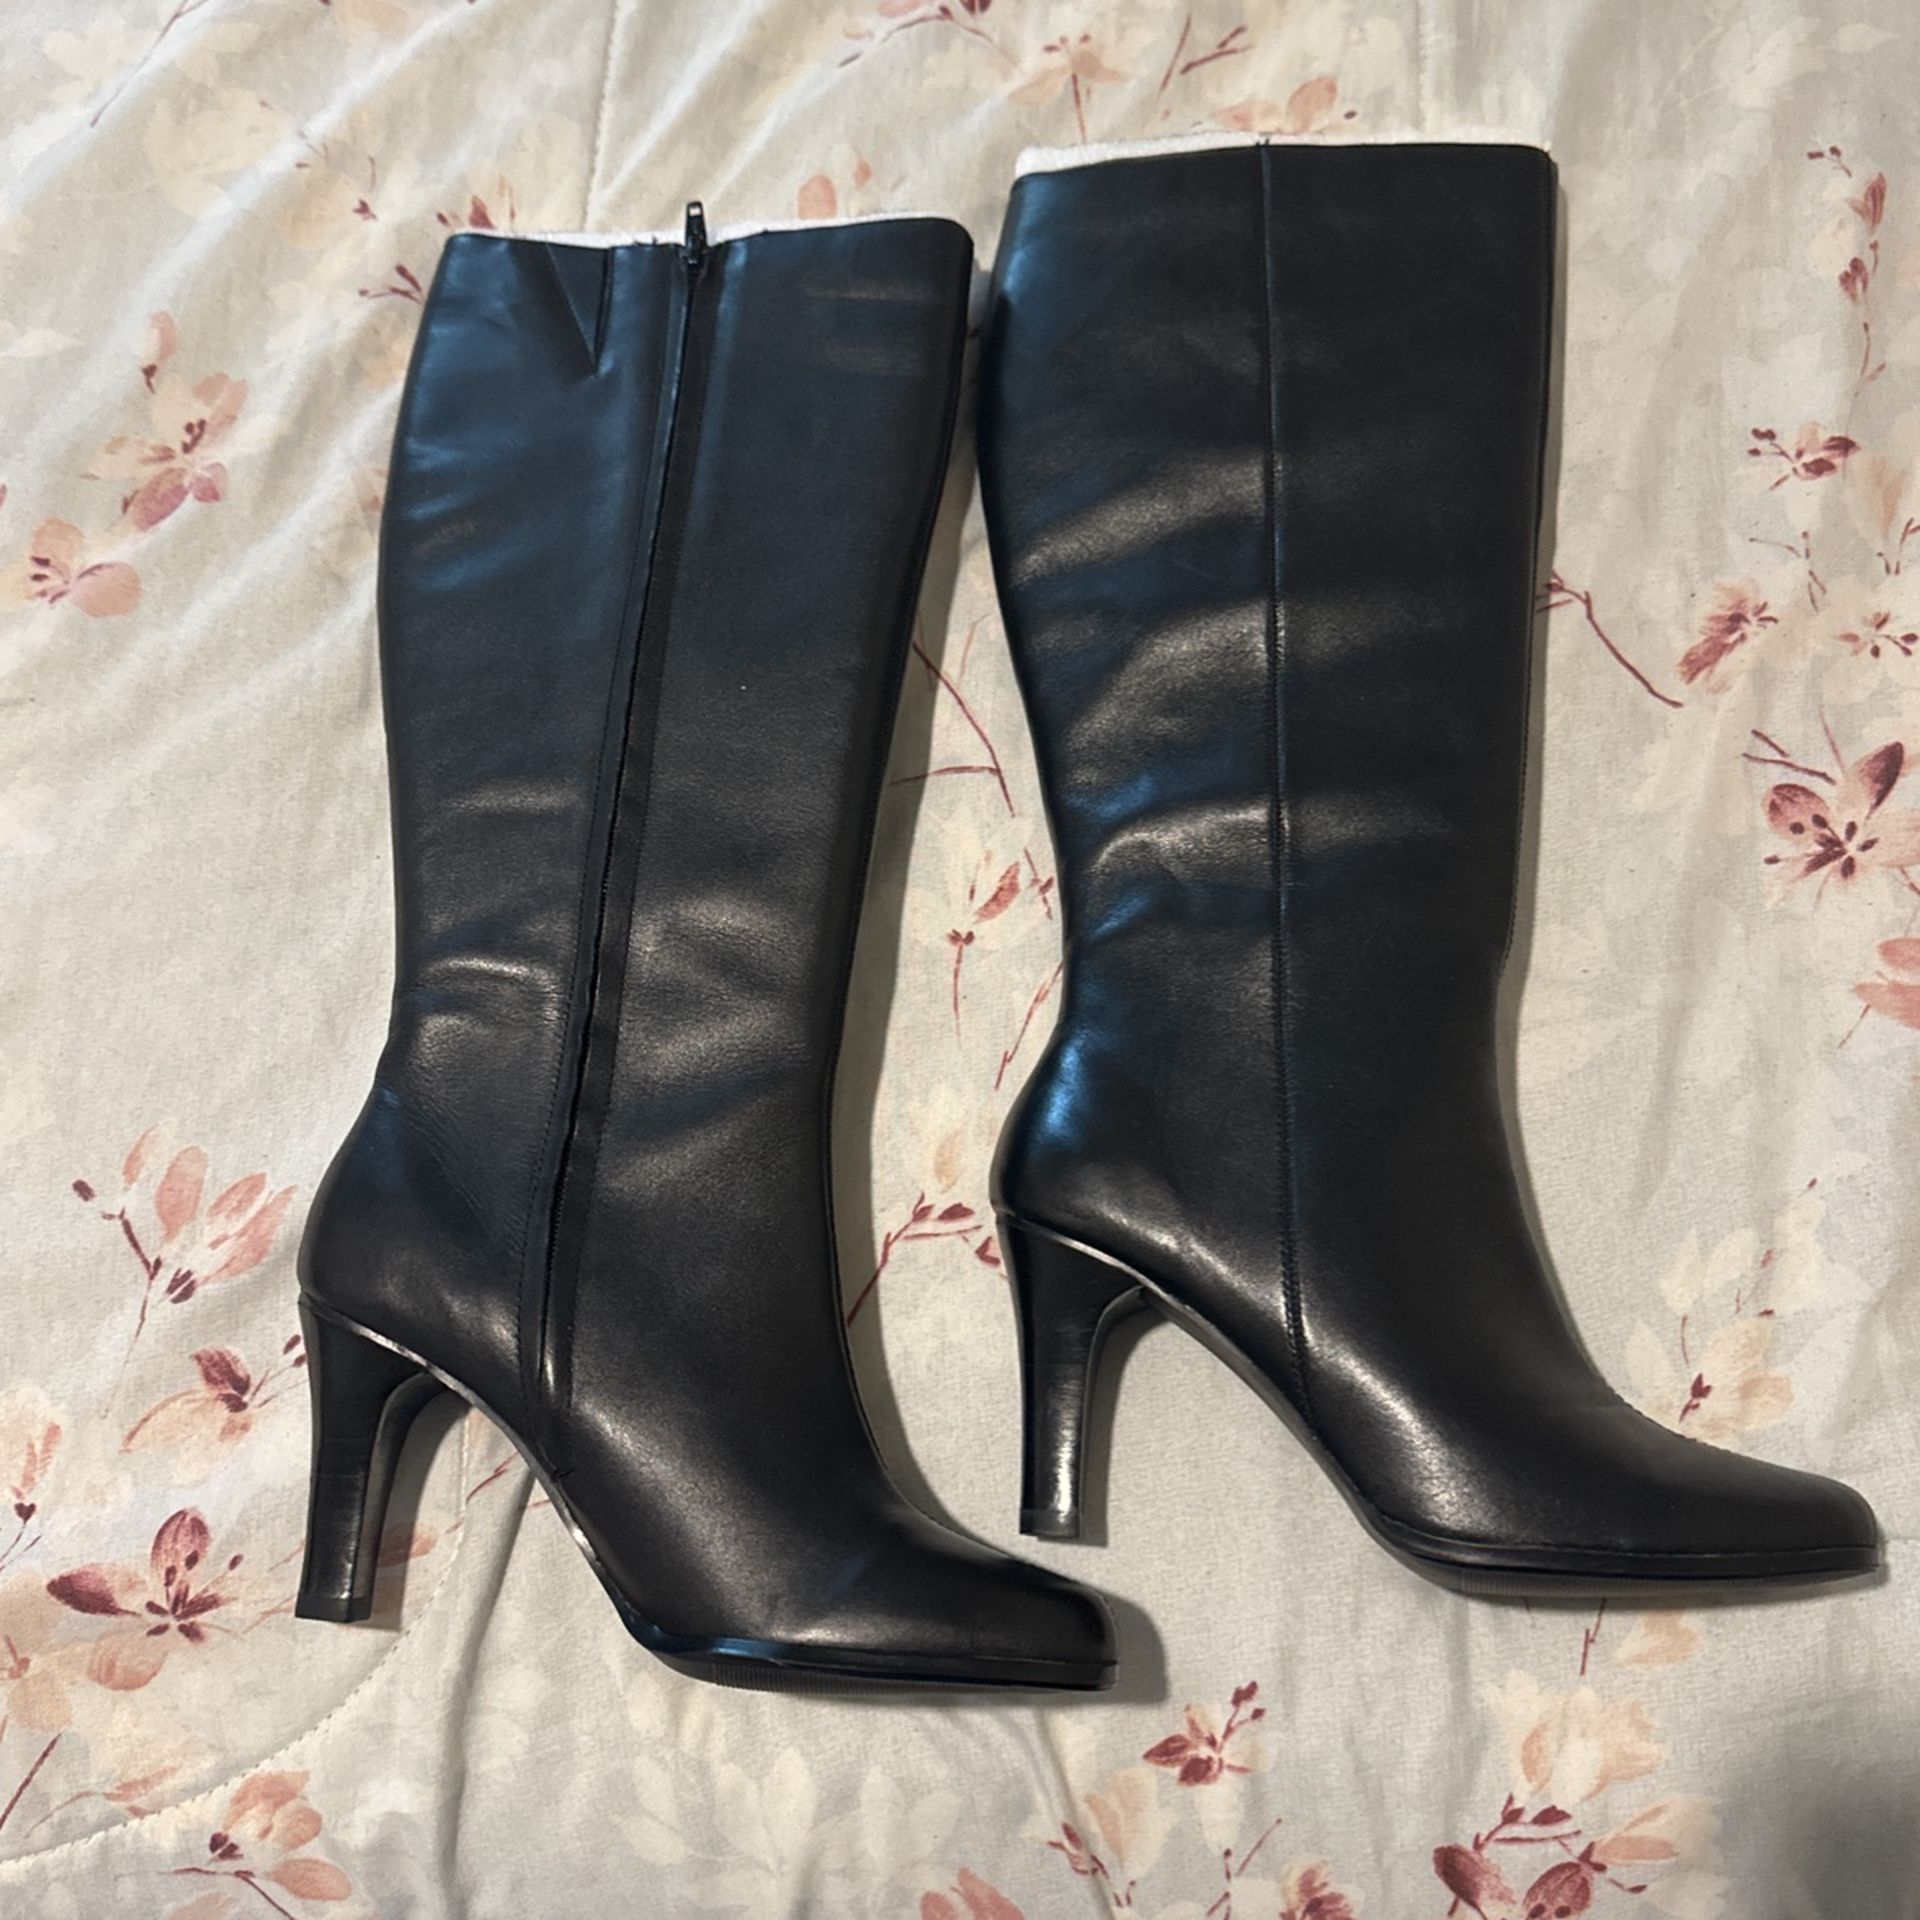 Women’s Boots Size 7